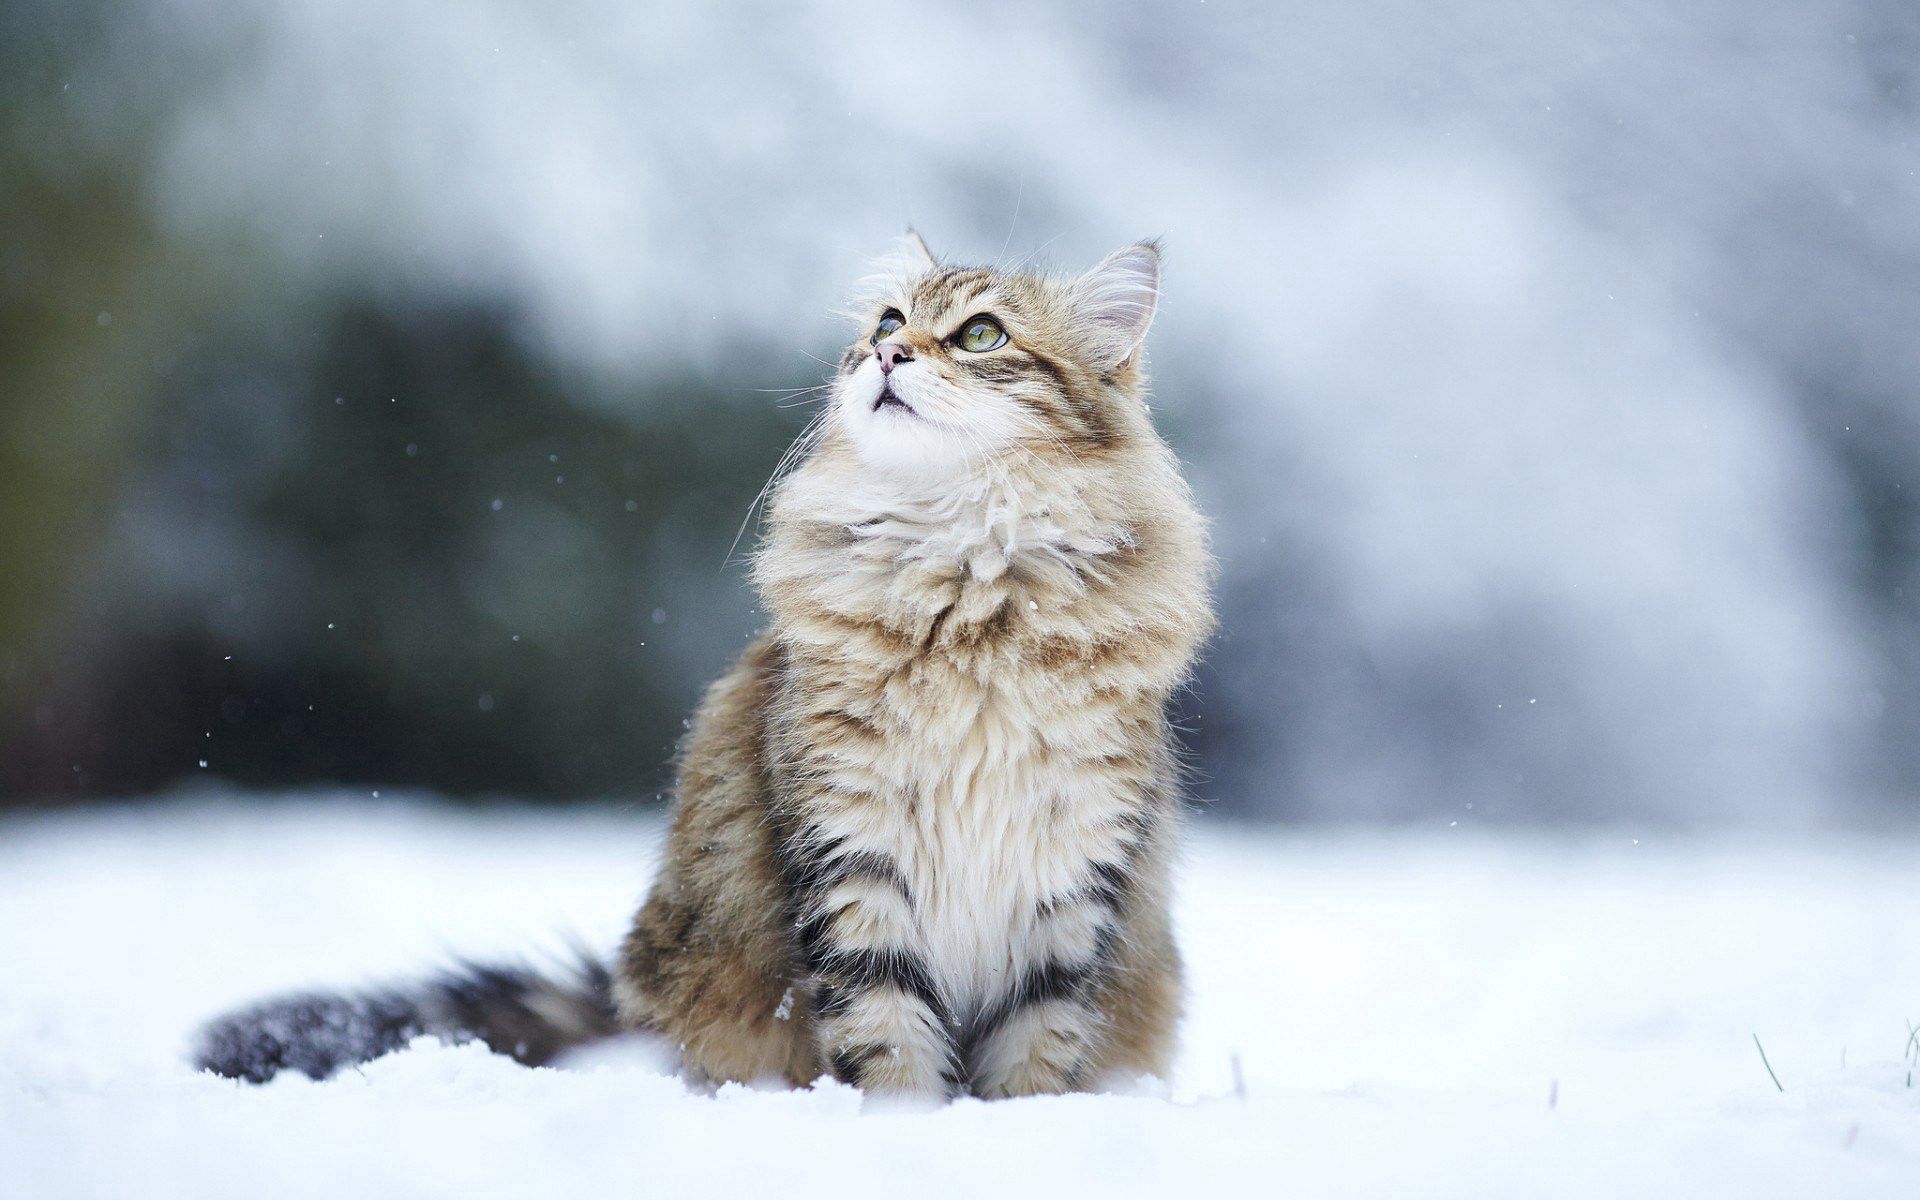 53630 download wallpaper cat, animals, snow, fluffy, sight, opinion screensavers and pictures for free